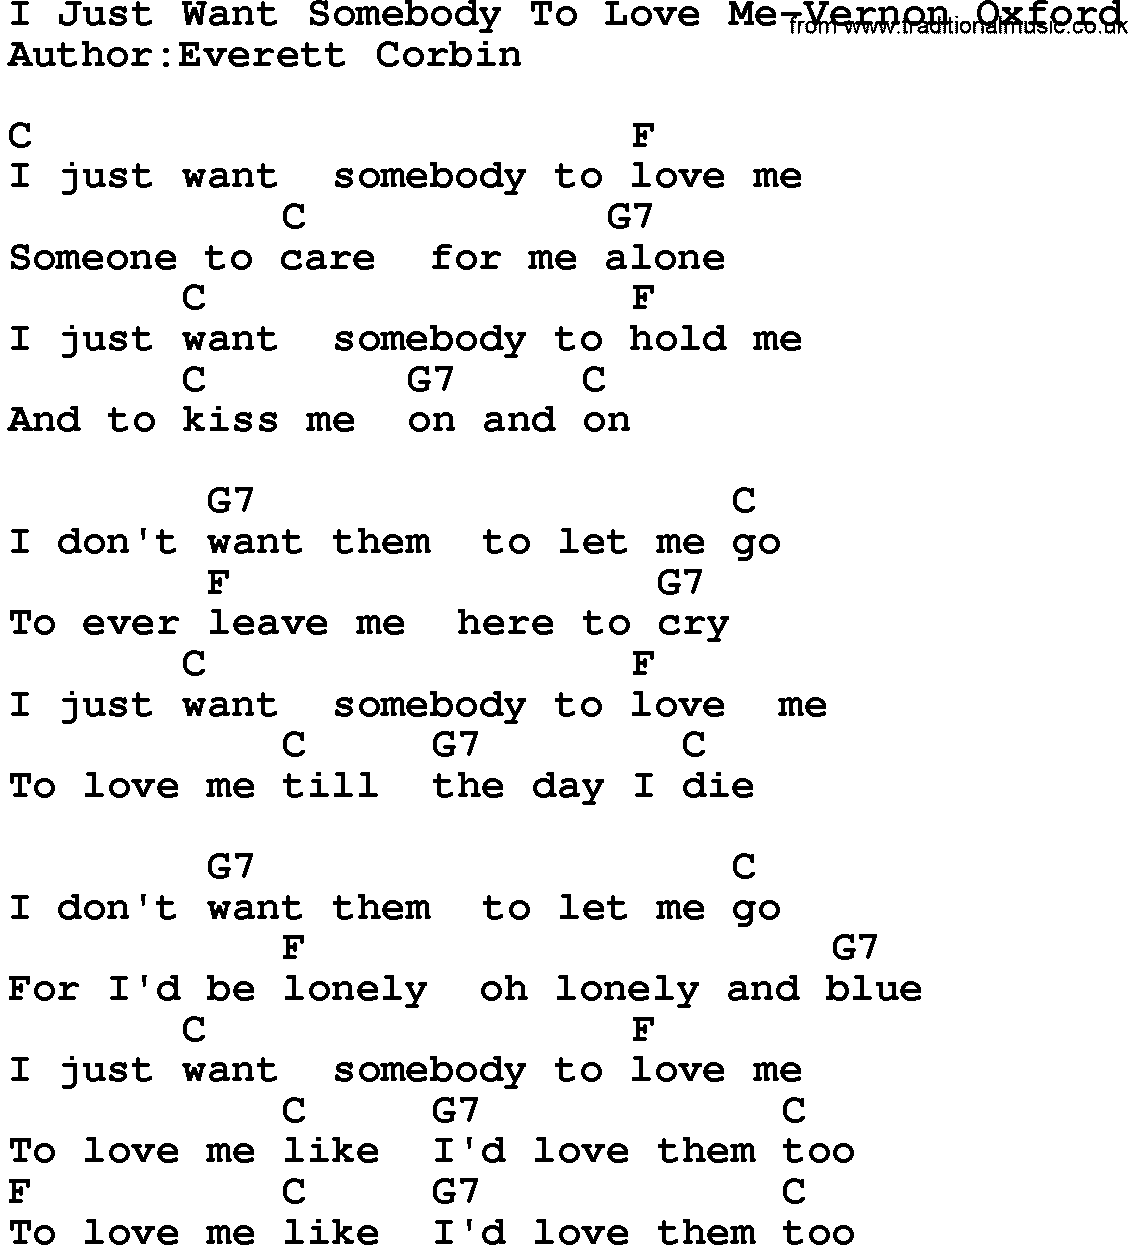 Country music song: I Just Want Somebody To Love Me-Vernon Oxford lyrics and chords